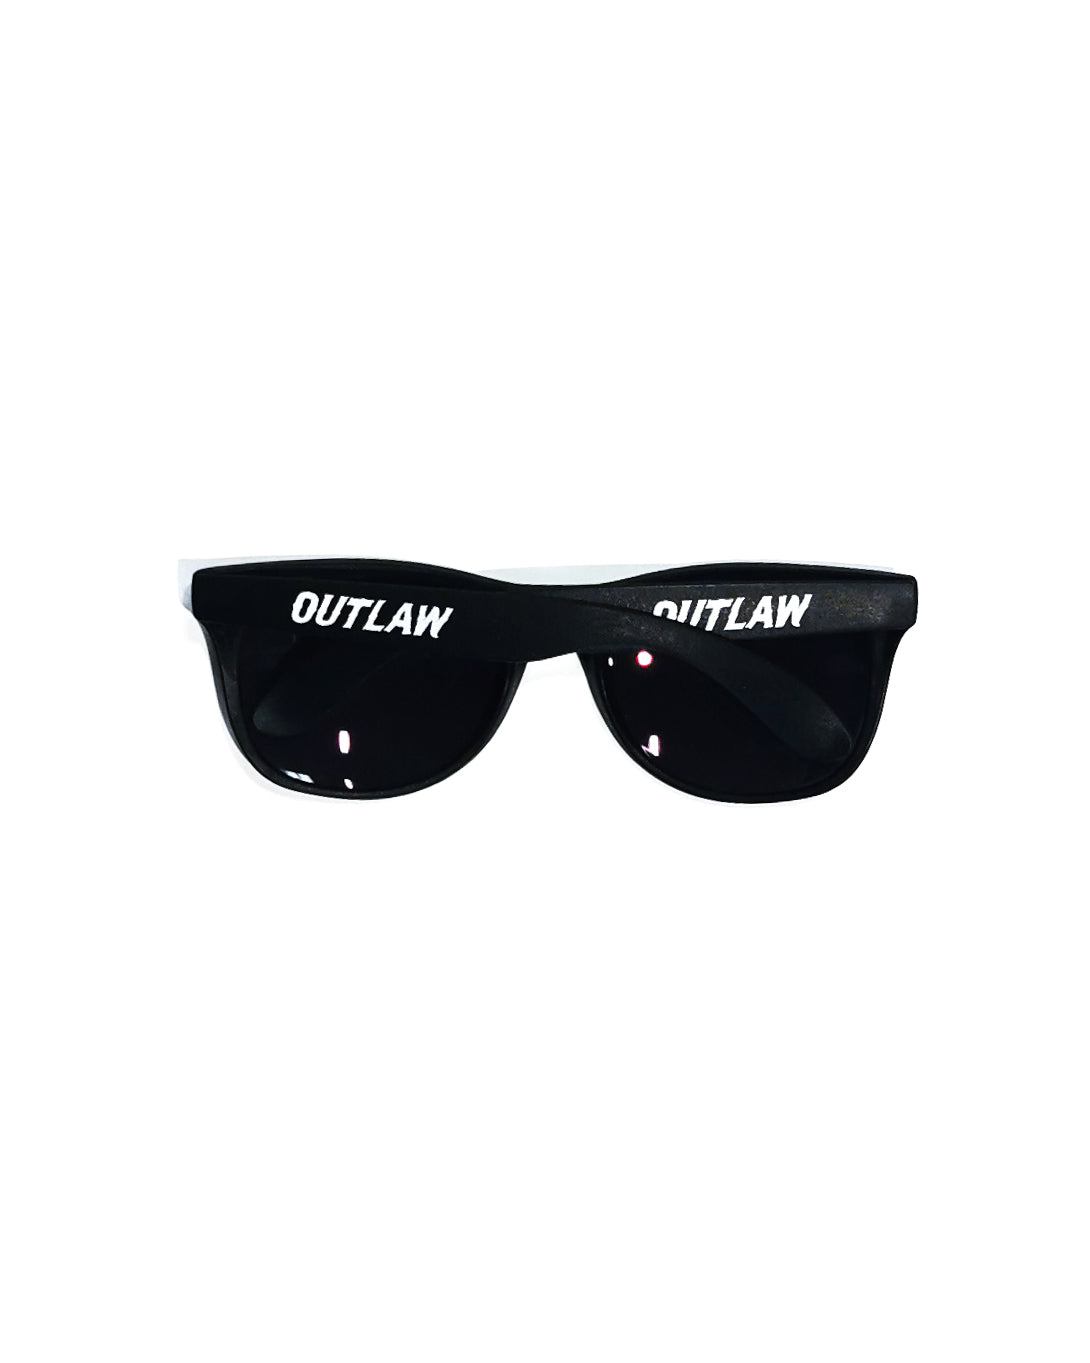 OUTLAW SHADES